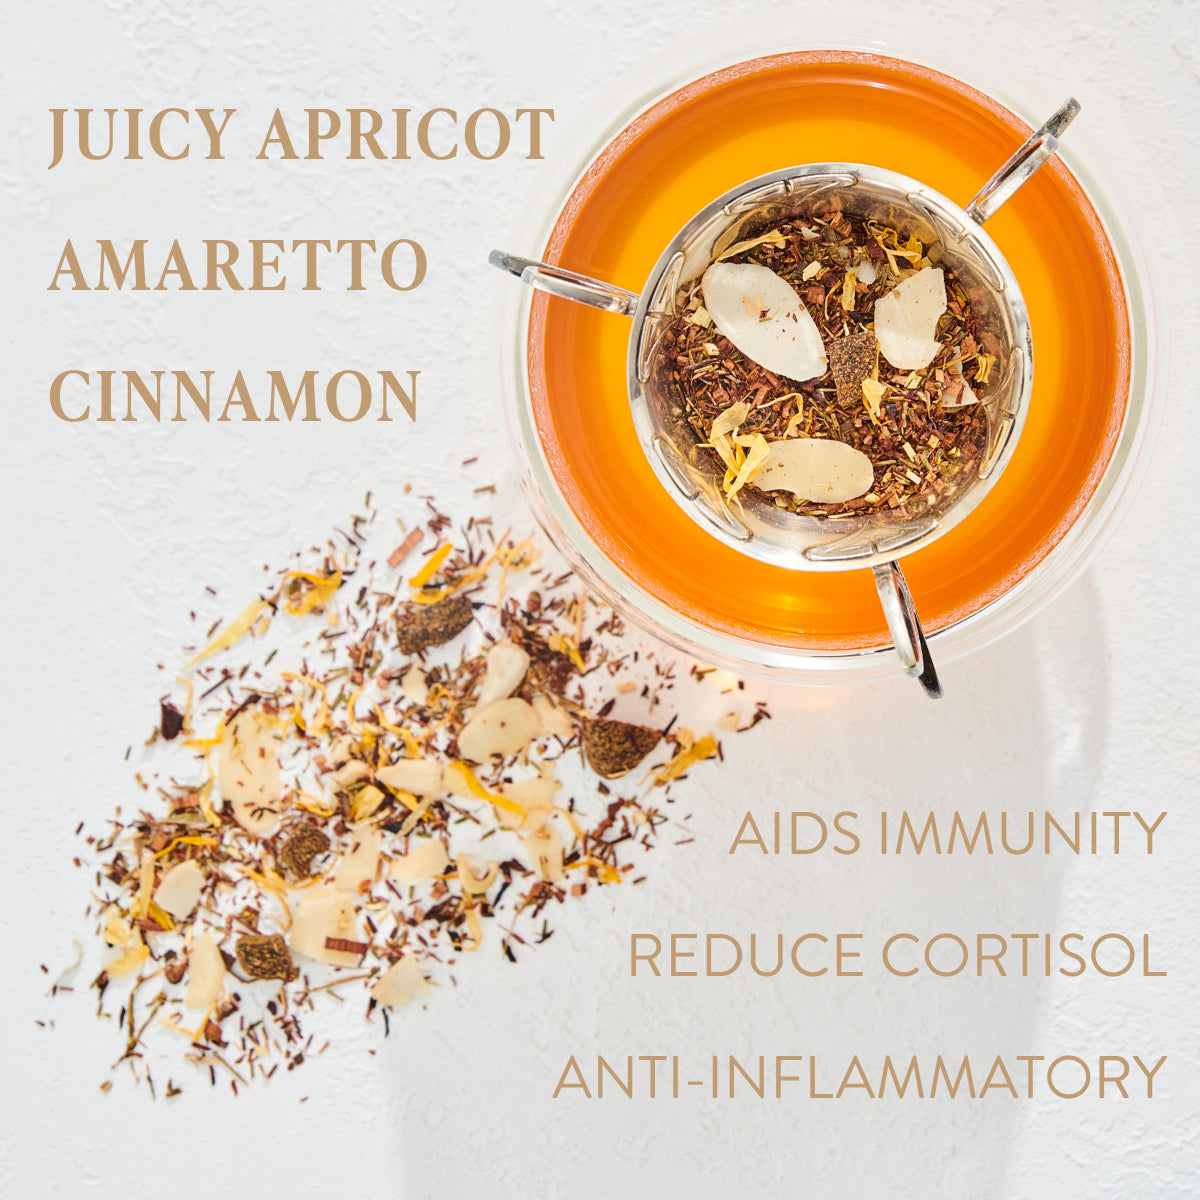 Overhead view of a loose leaf tea with dried ingredients, including apricot slices, amaretto bits, and cinnamon pieces. Text reads: &quot;Carnelian : Caffeine-Free Apricot Amaretto Tea&quot; and &quot;Aids Immunity,&quot; &quot;Reduce Cortisol,&quot; and &quot;Anti-inflammatory.&quot; Experience the benefits of Magic Hour.